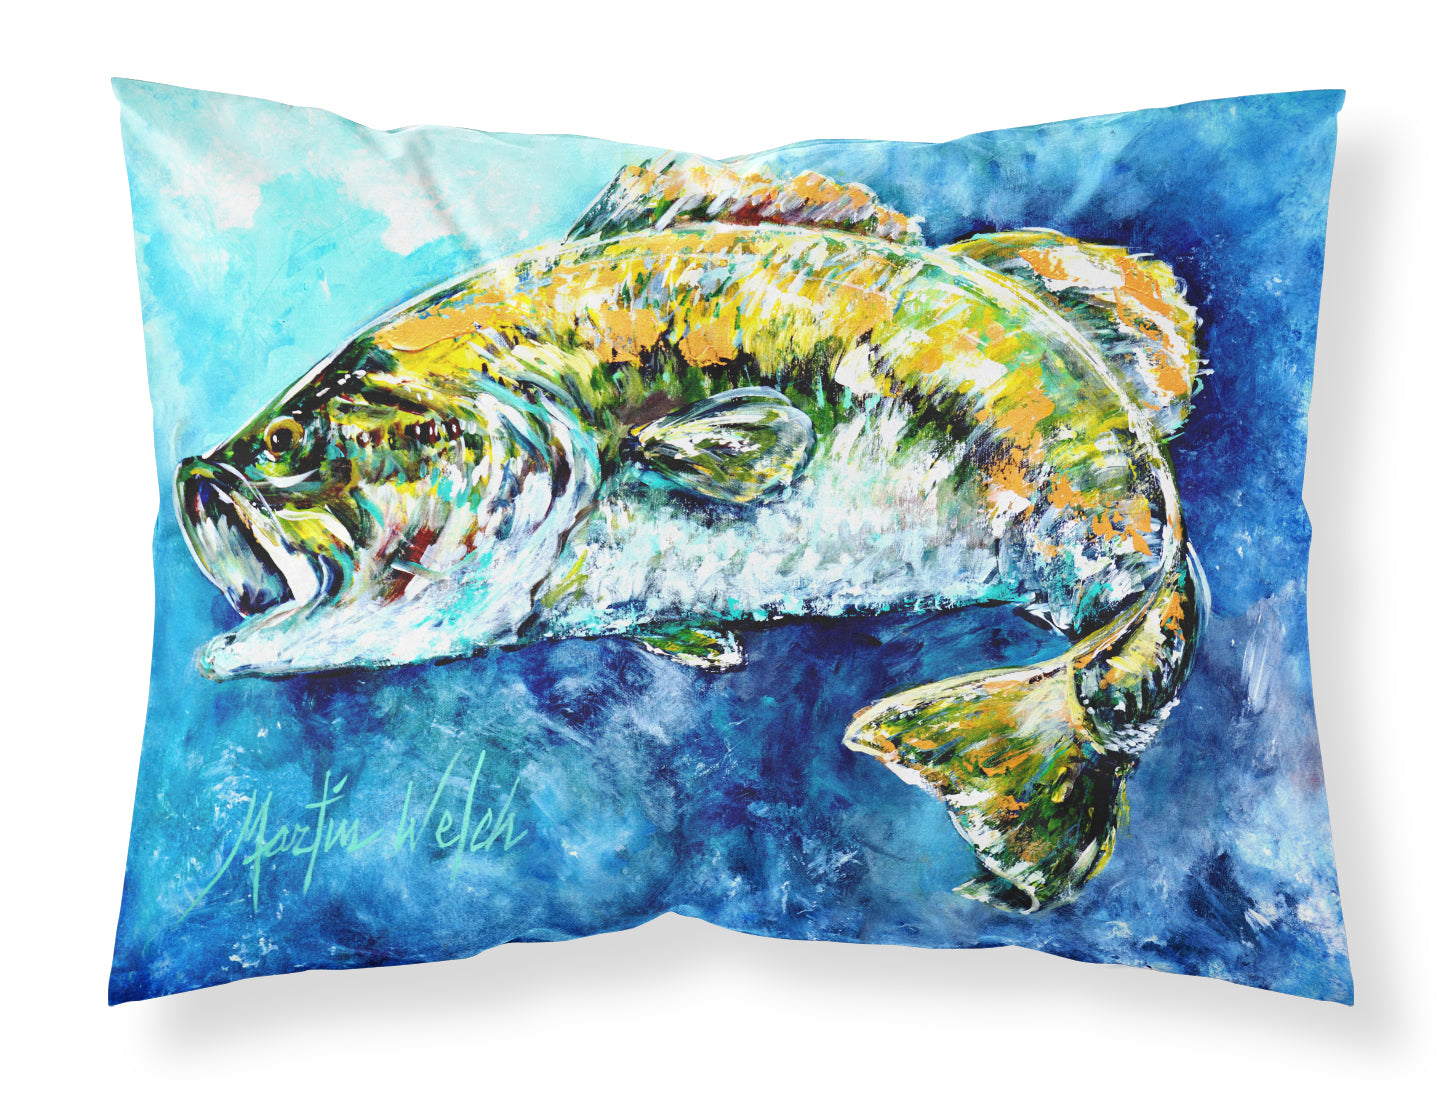 Buy this Bobby the Best Bass Fabric Standard Pillowcase